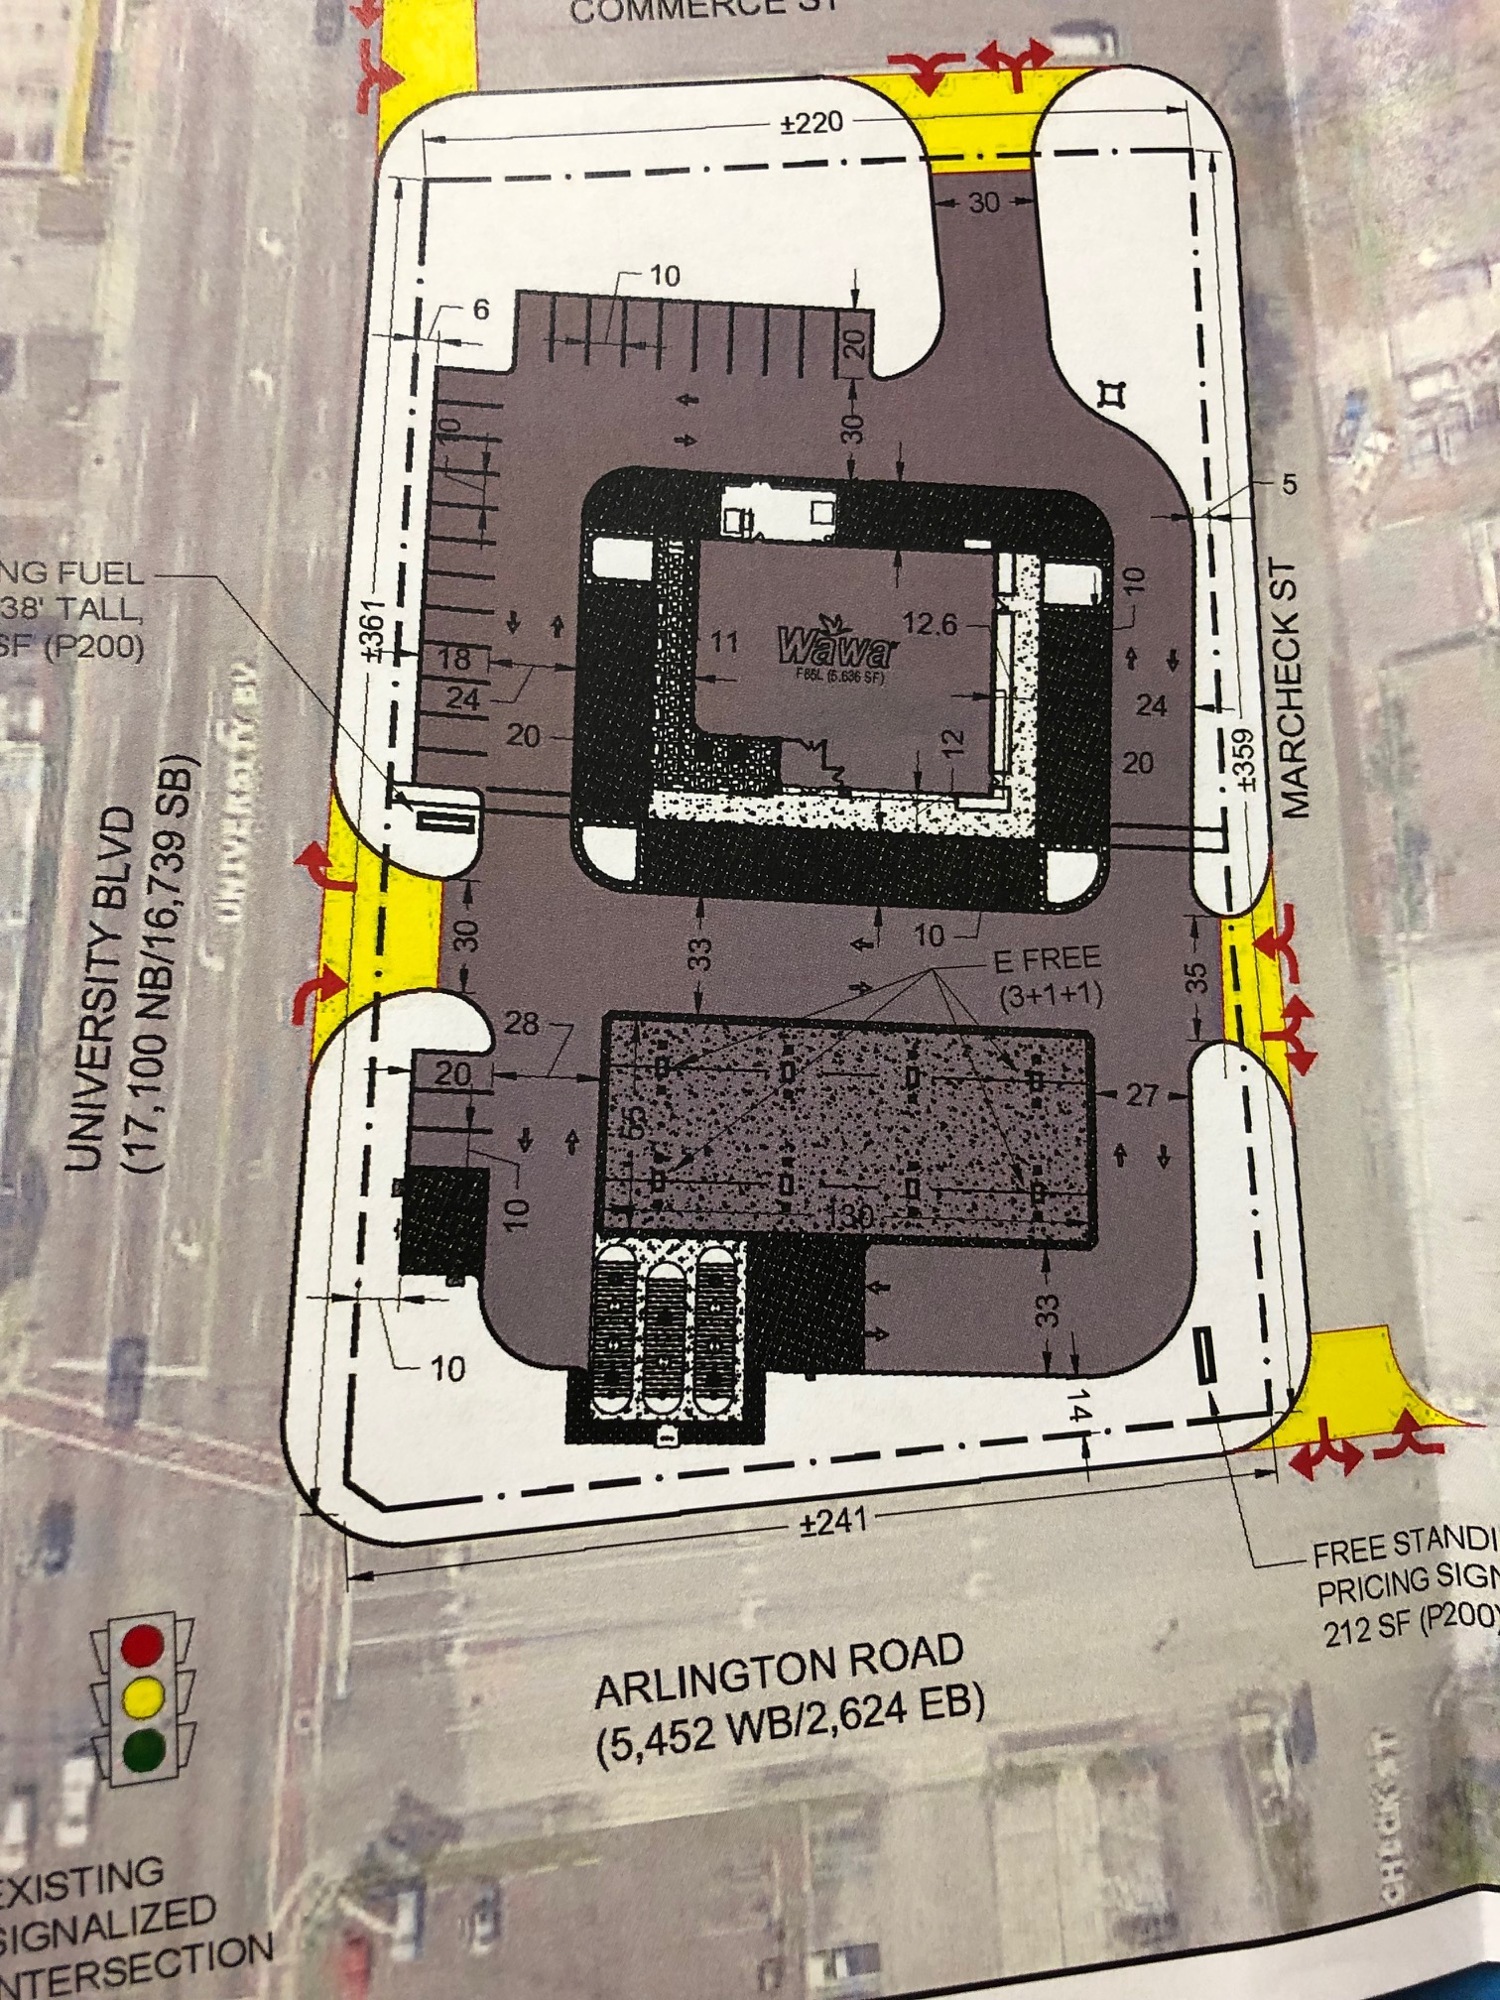 The Arlington Wawa site is bordered by University Boulevard, Arlington Road and Marcheck and Commerce streets. The driveway on University Boulevard will be limited to vehicles entering the property.